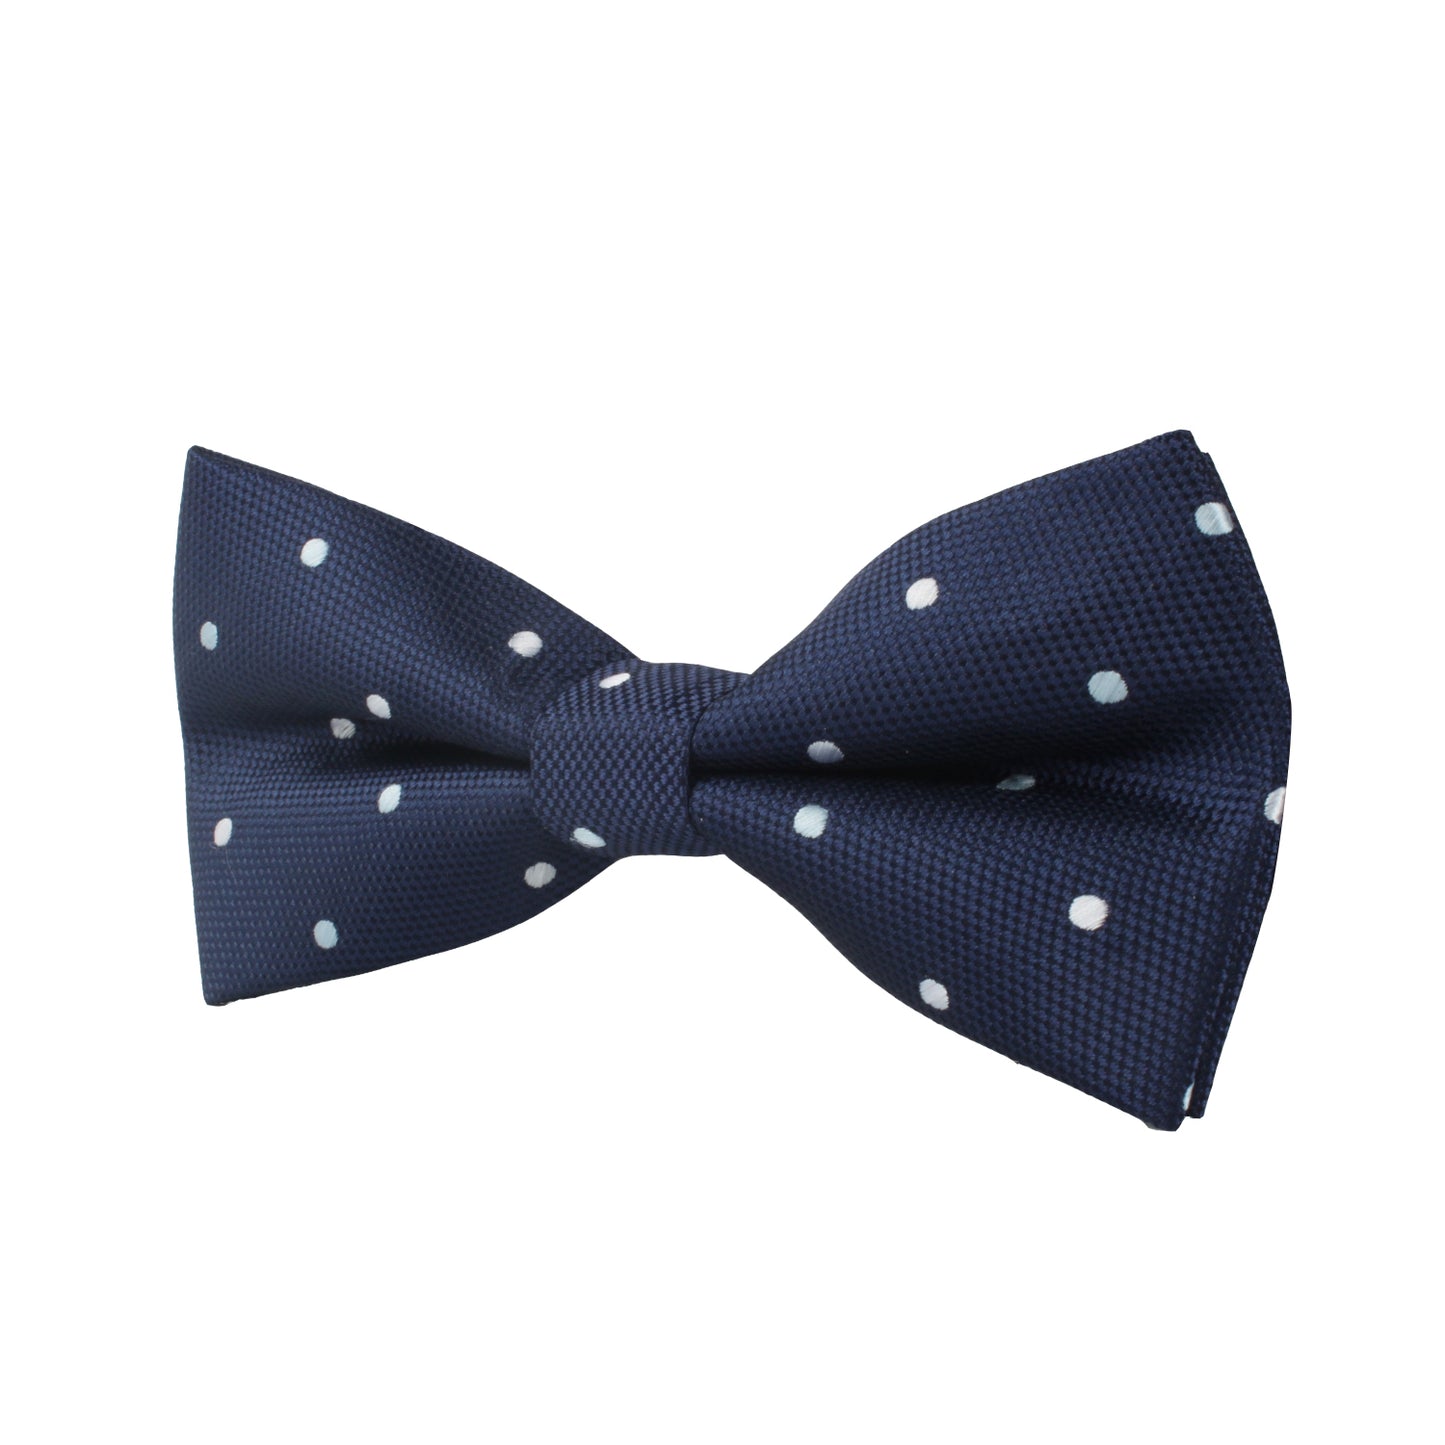 White and Blue Polka Dot Bow Tie